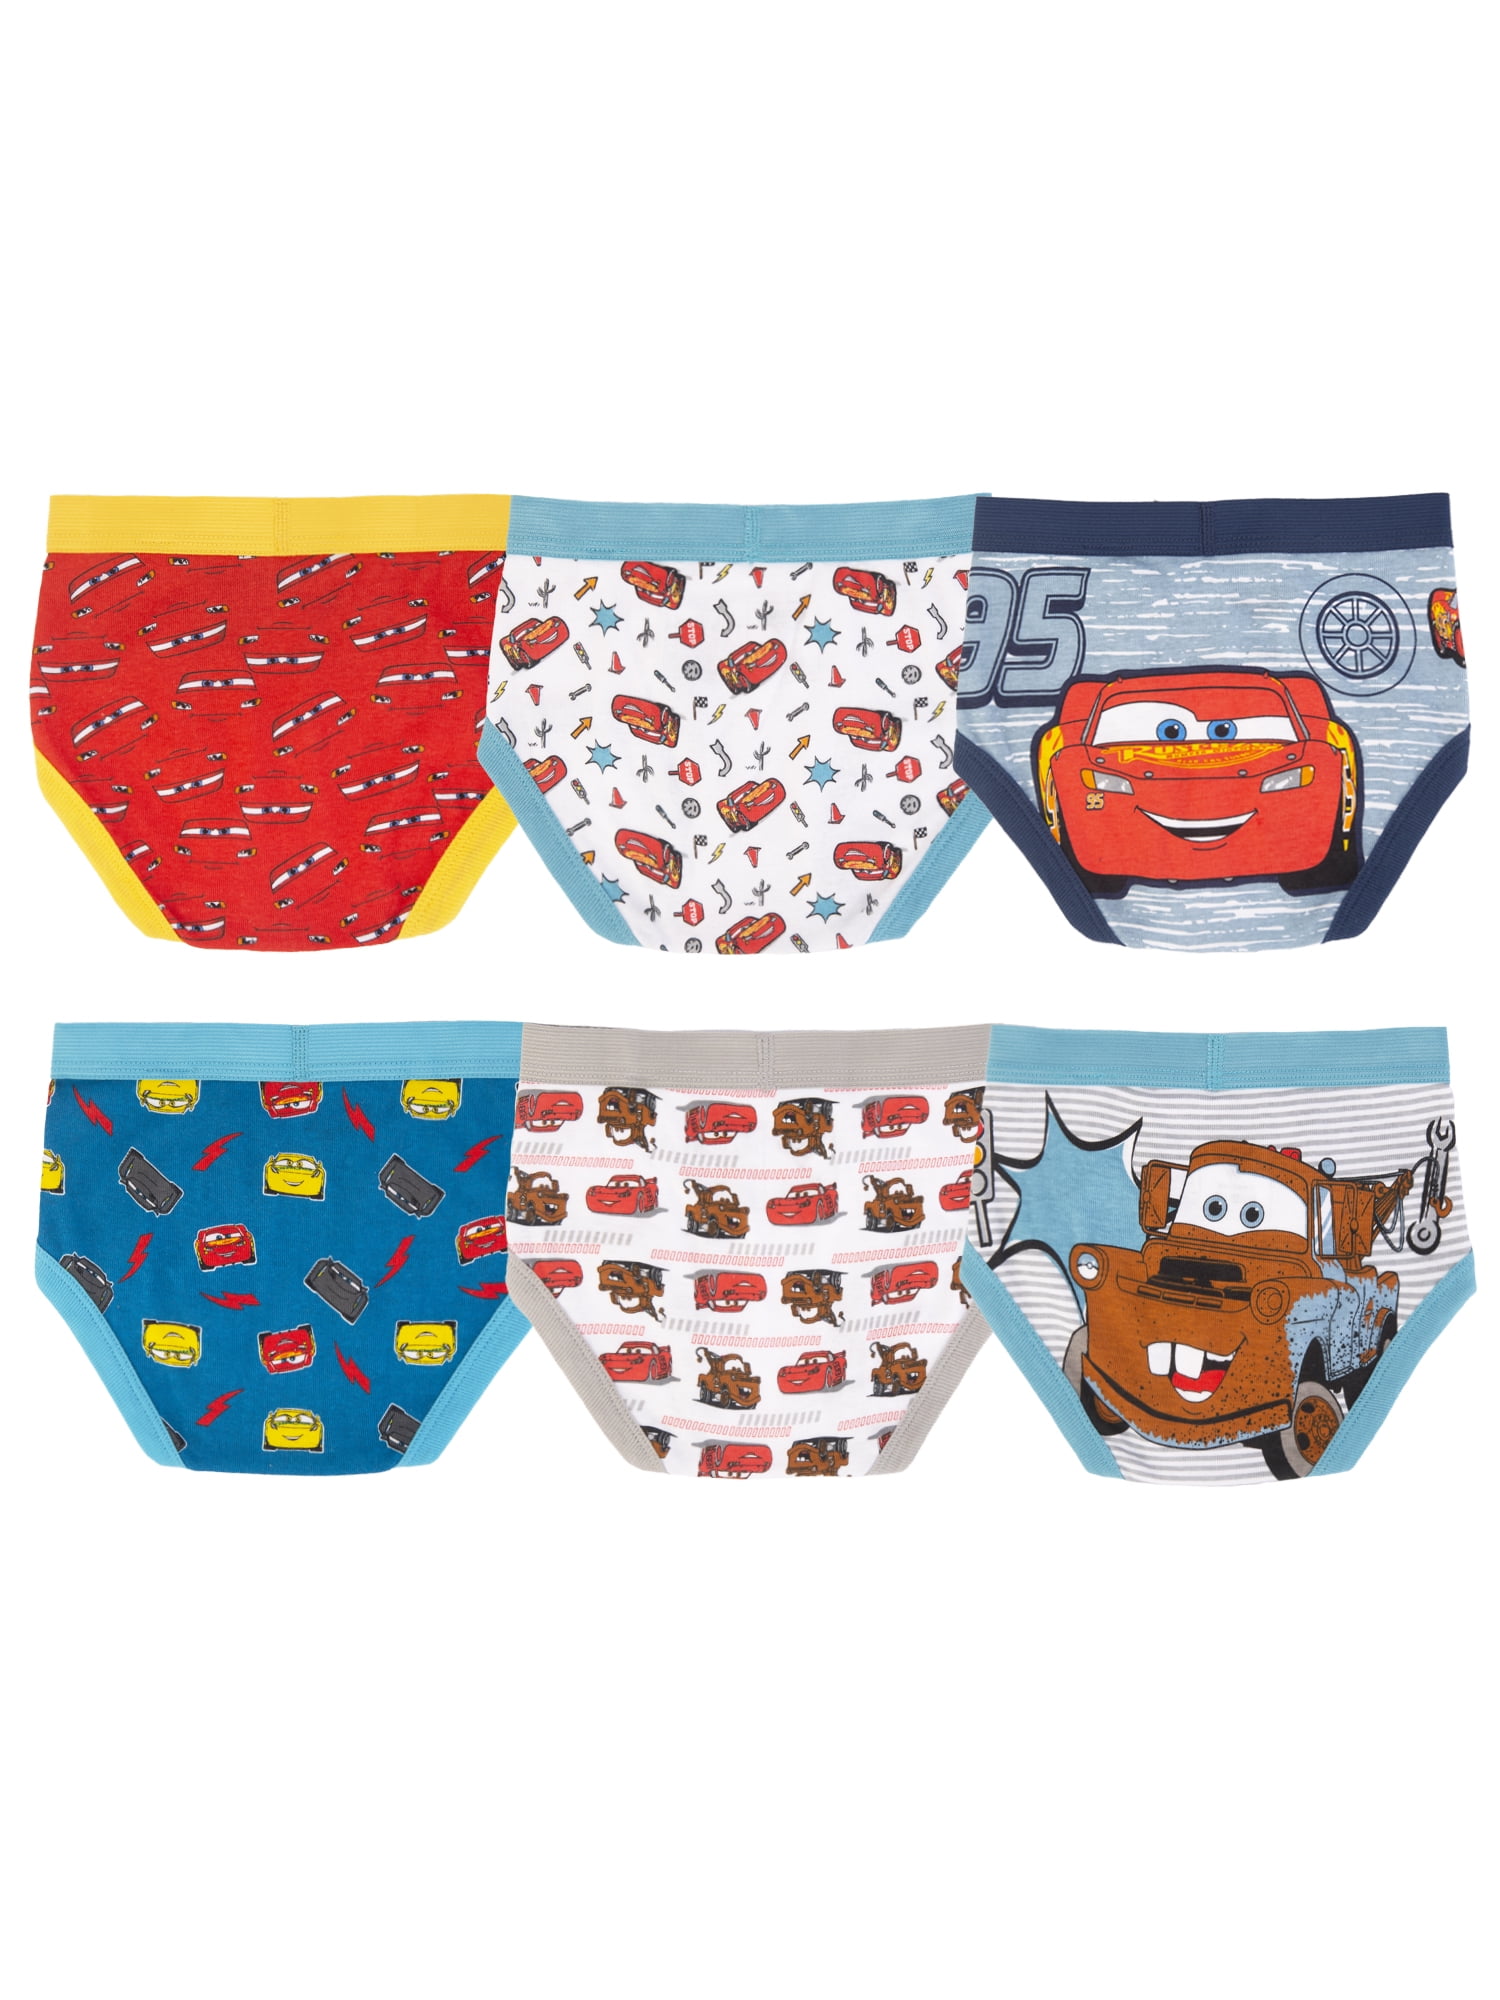 Cars Toddler Boys Briefs, 6 Pack Sizes 2T-4T 